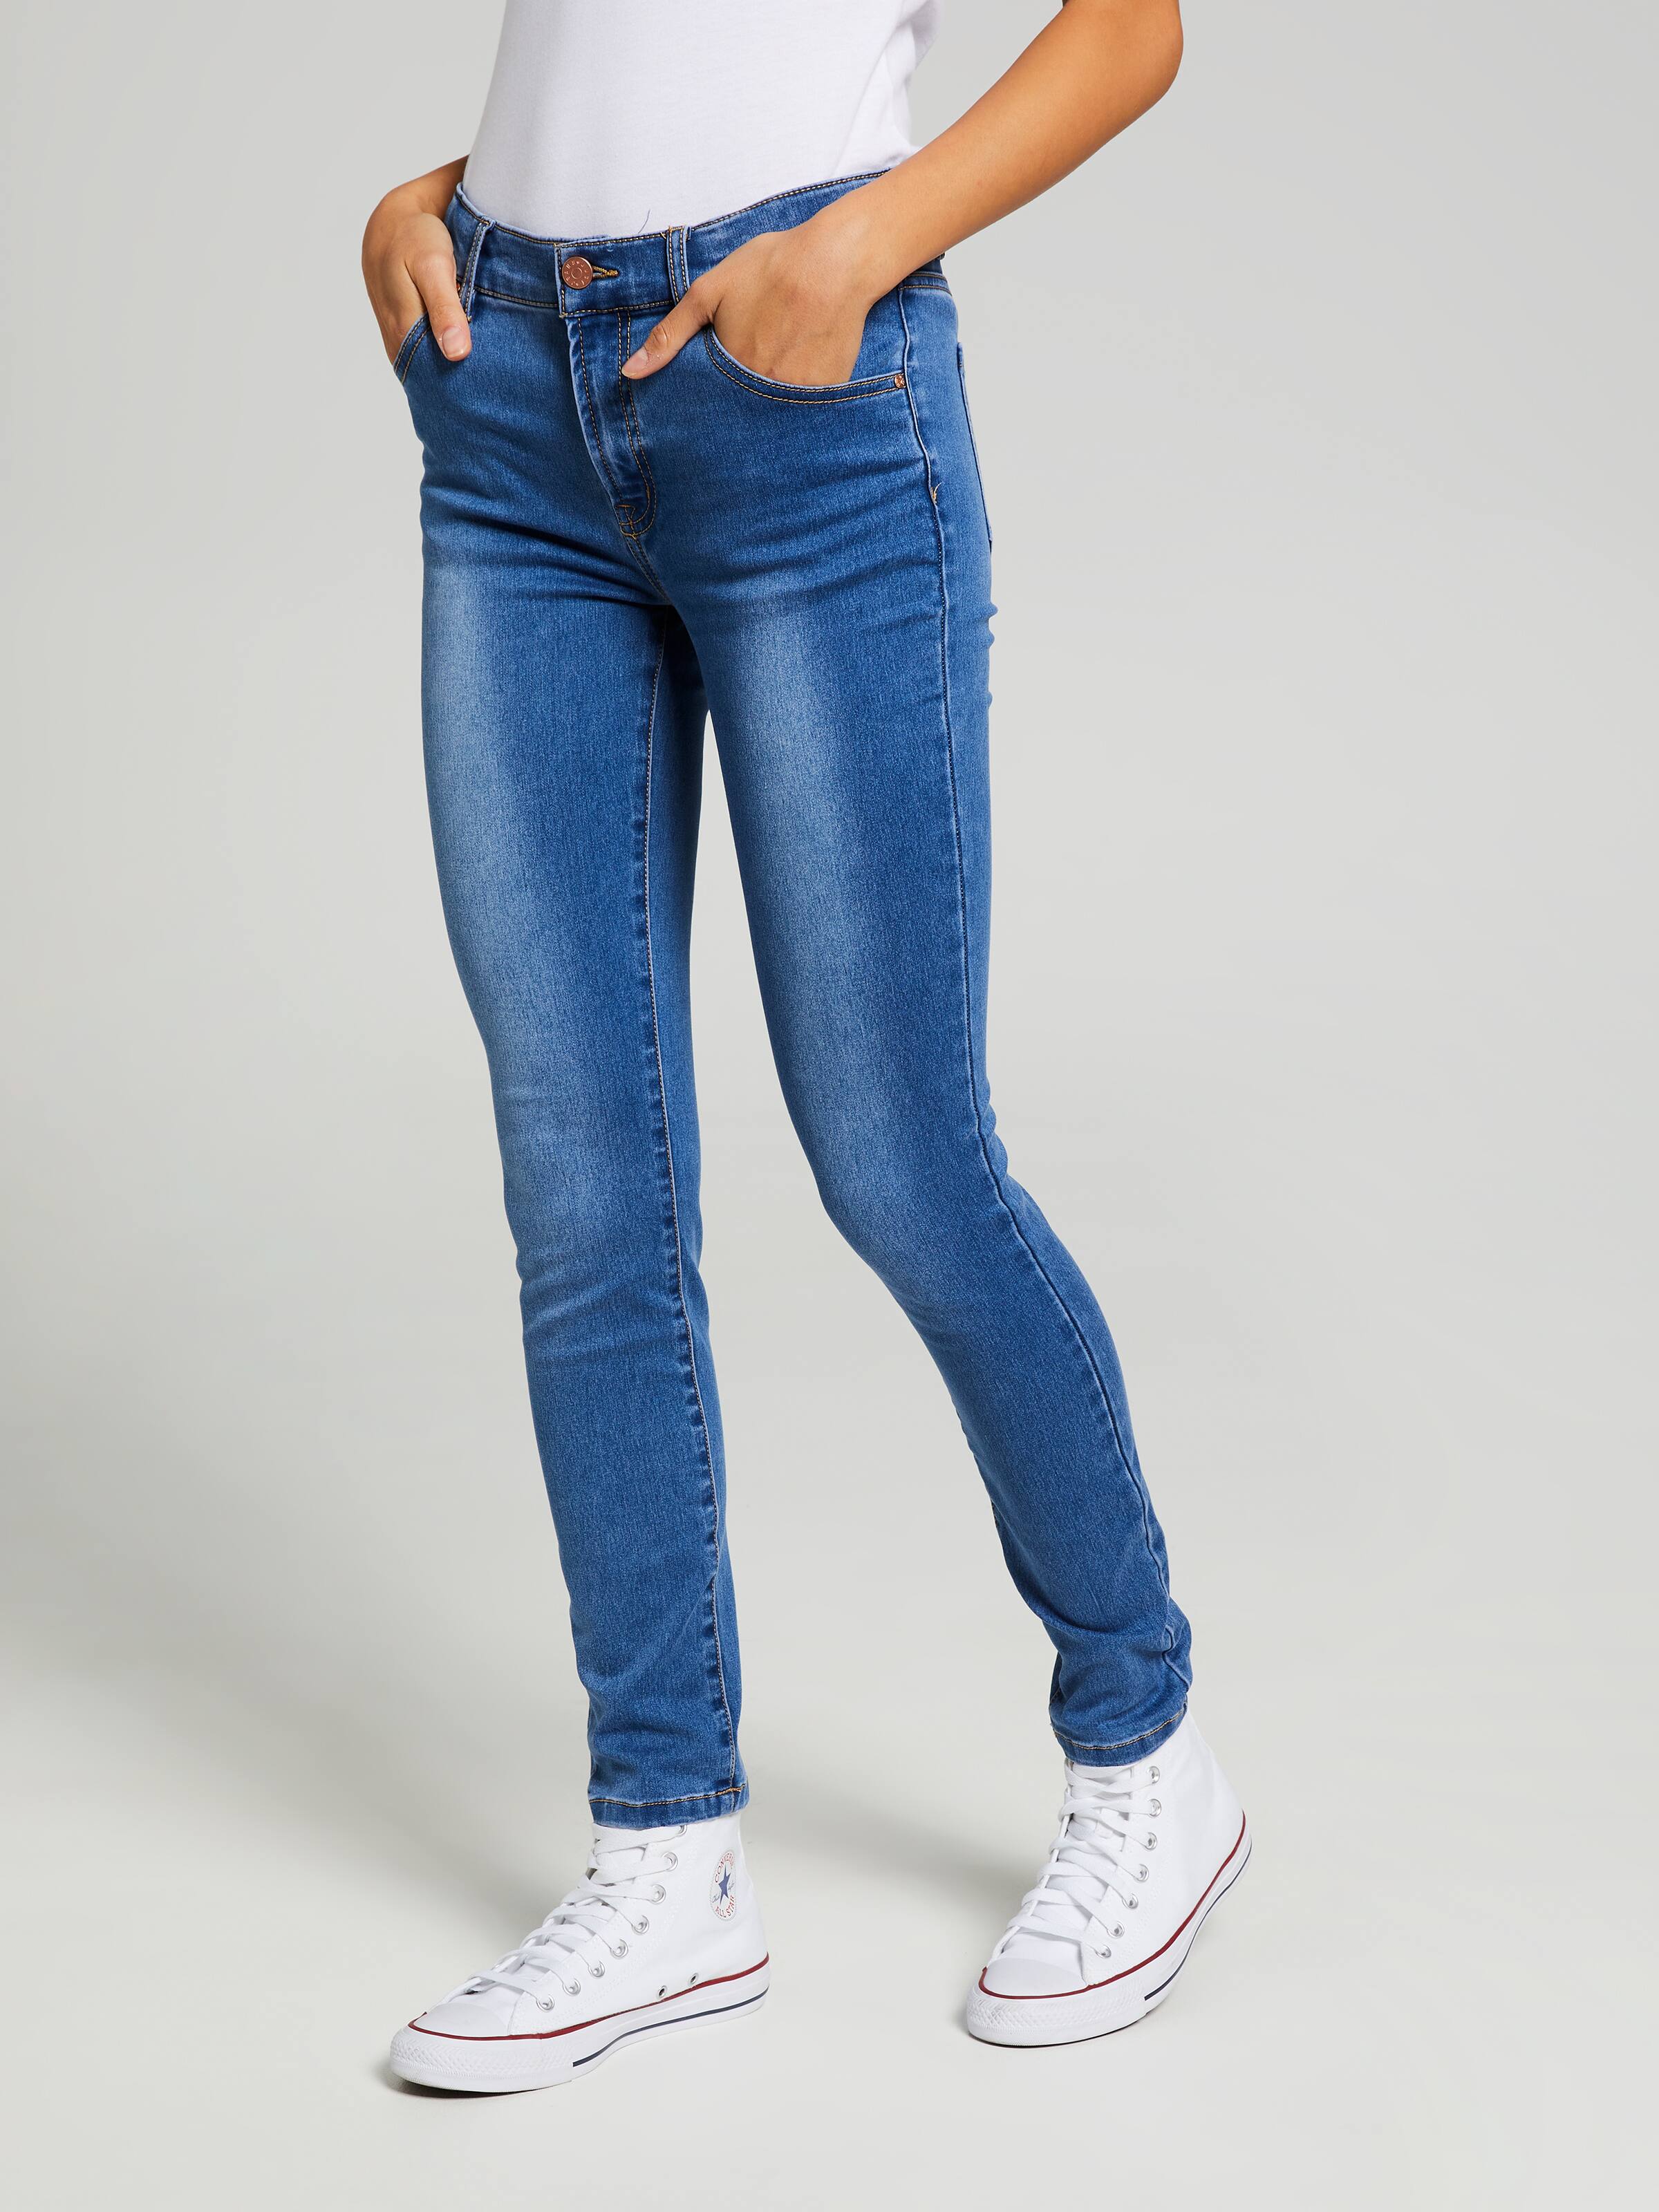 Girls Kylie Luxe Mid Rise Skinny Jean